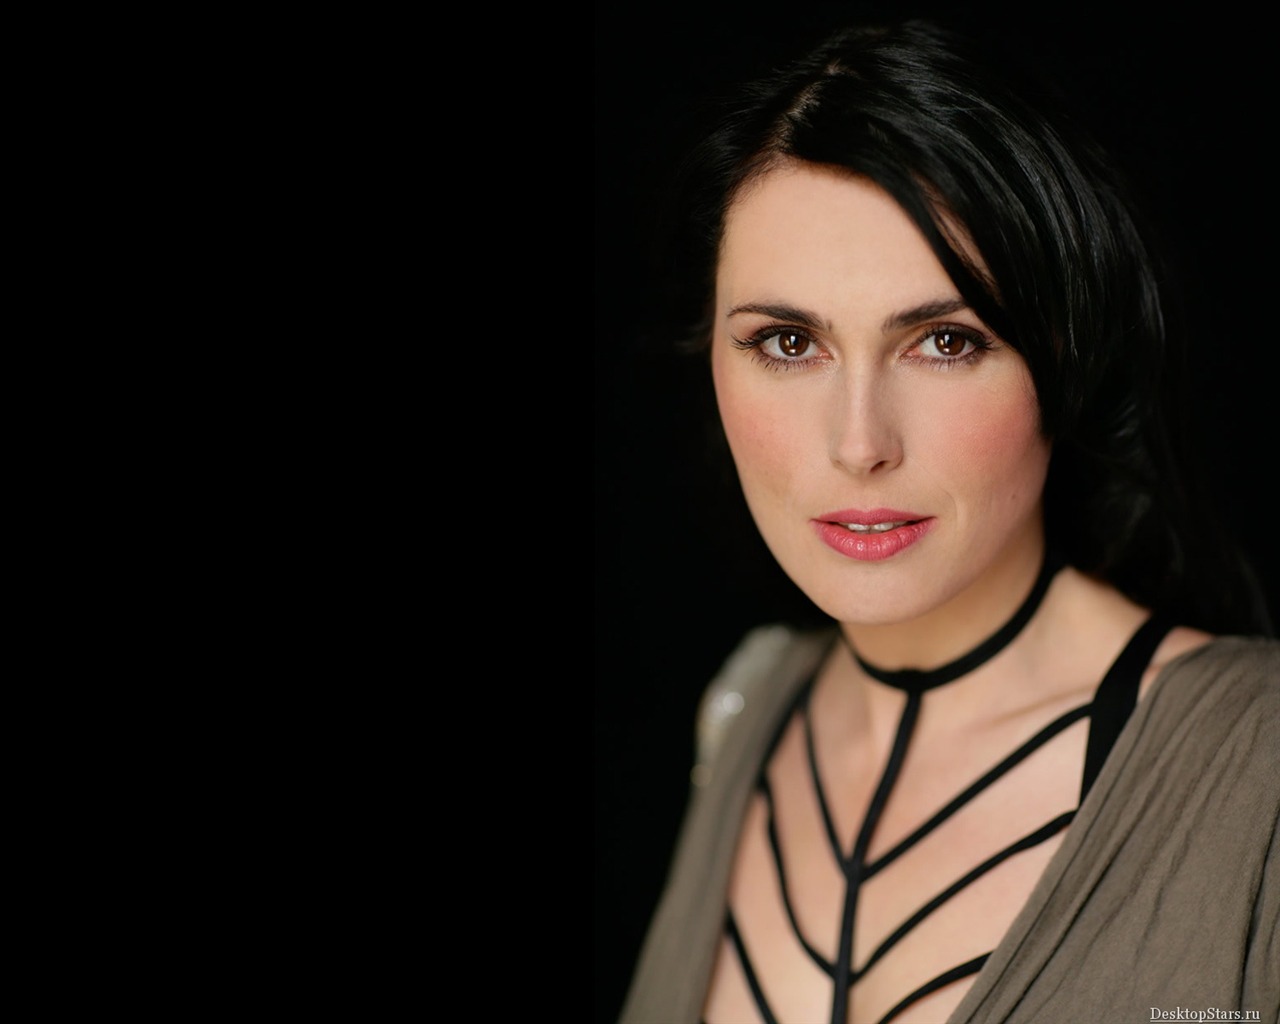 Sharon den Adel #005 - 1280x1024 Wallpapers Pictures Photos Images